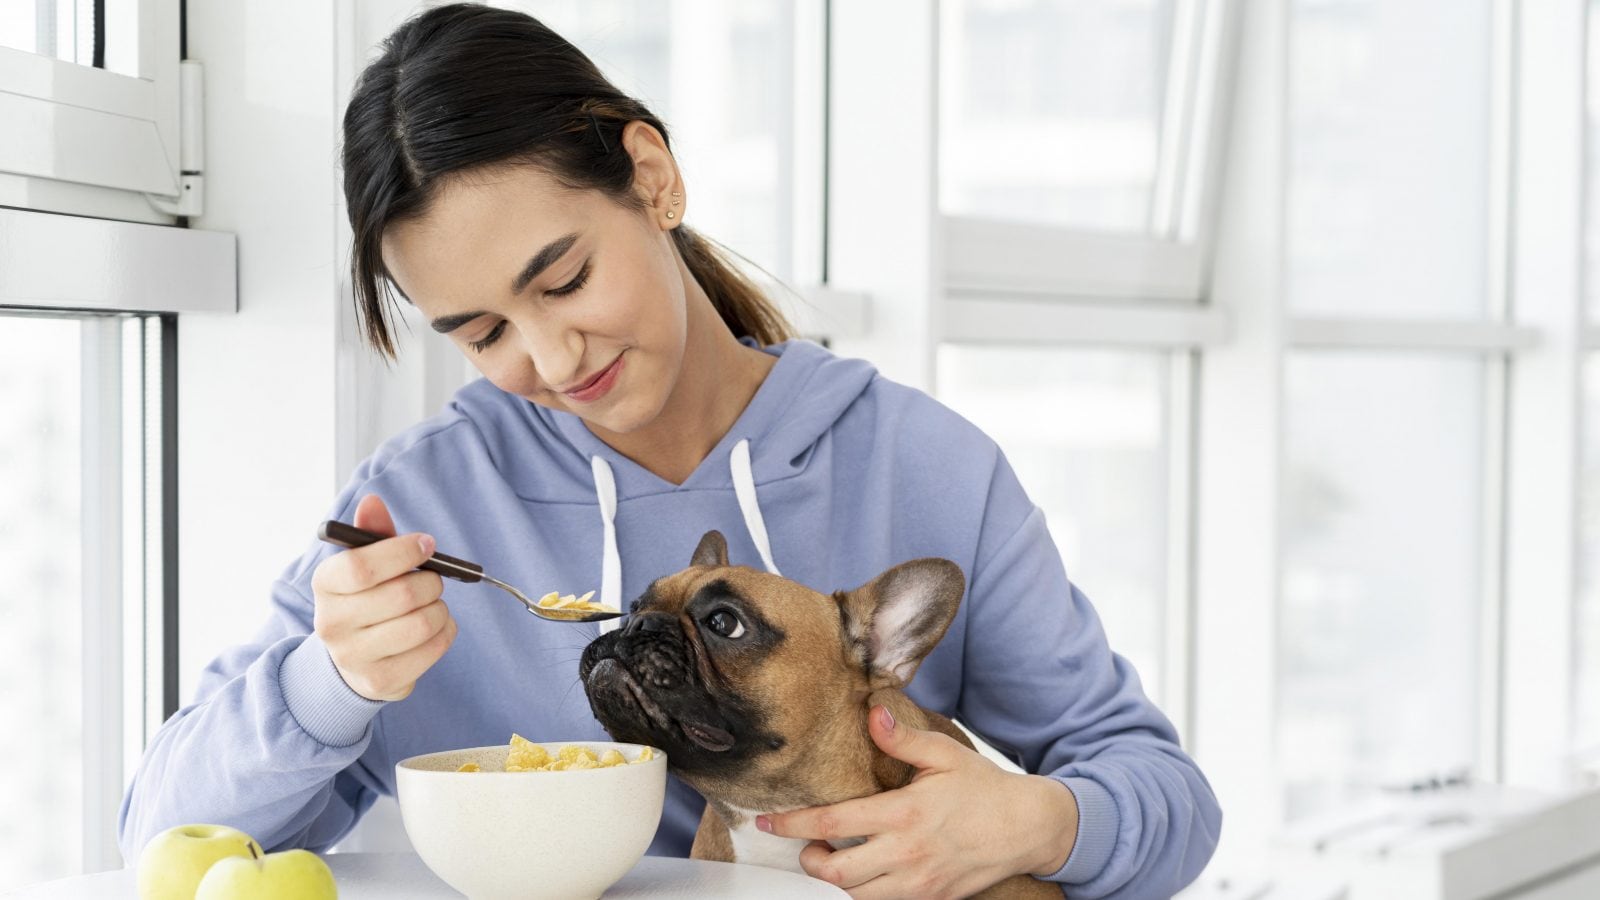 The Truth Behind Popular Myths About Packaged Pet Food